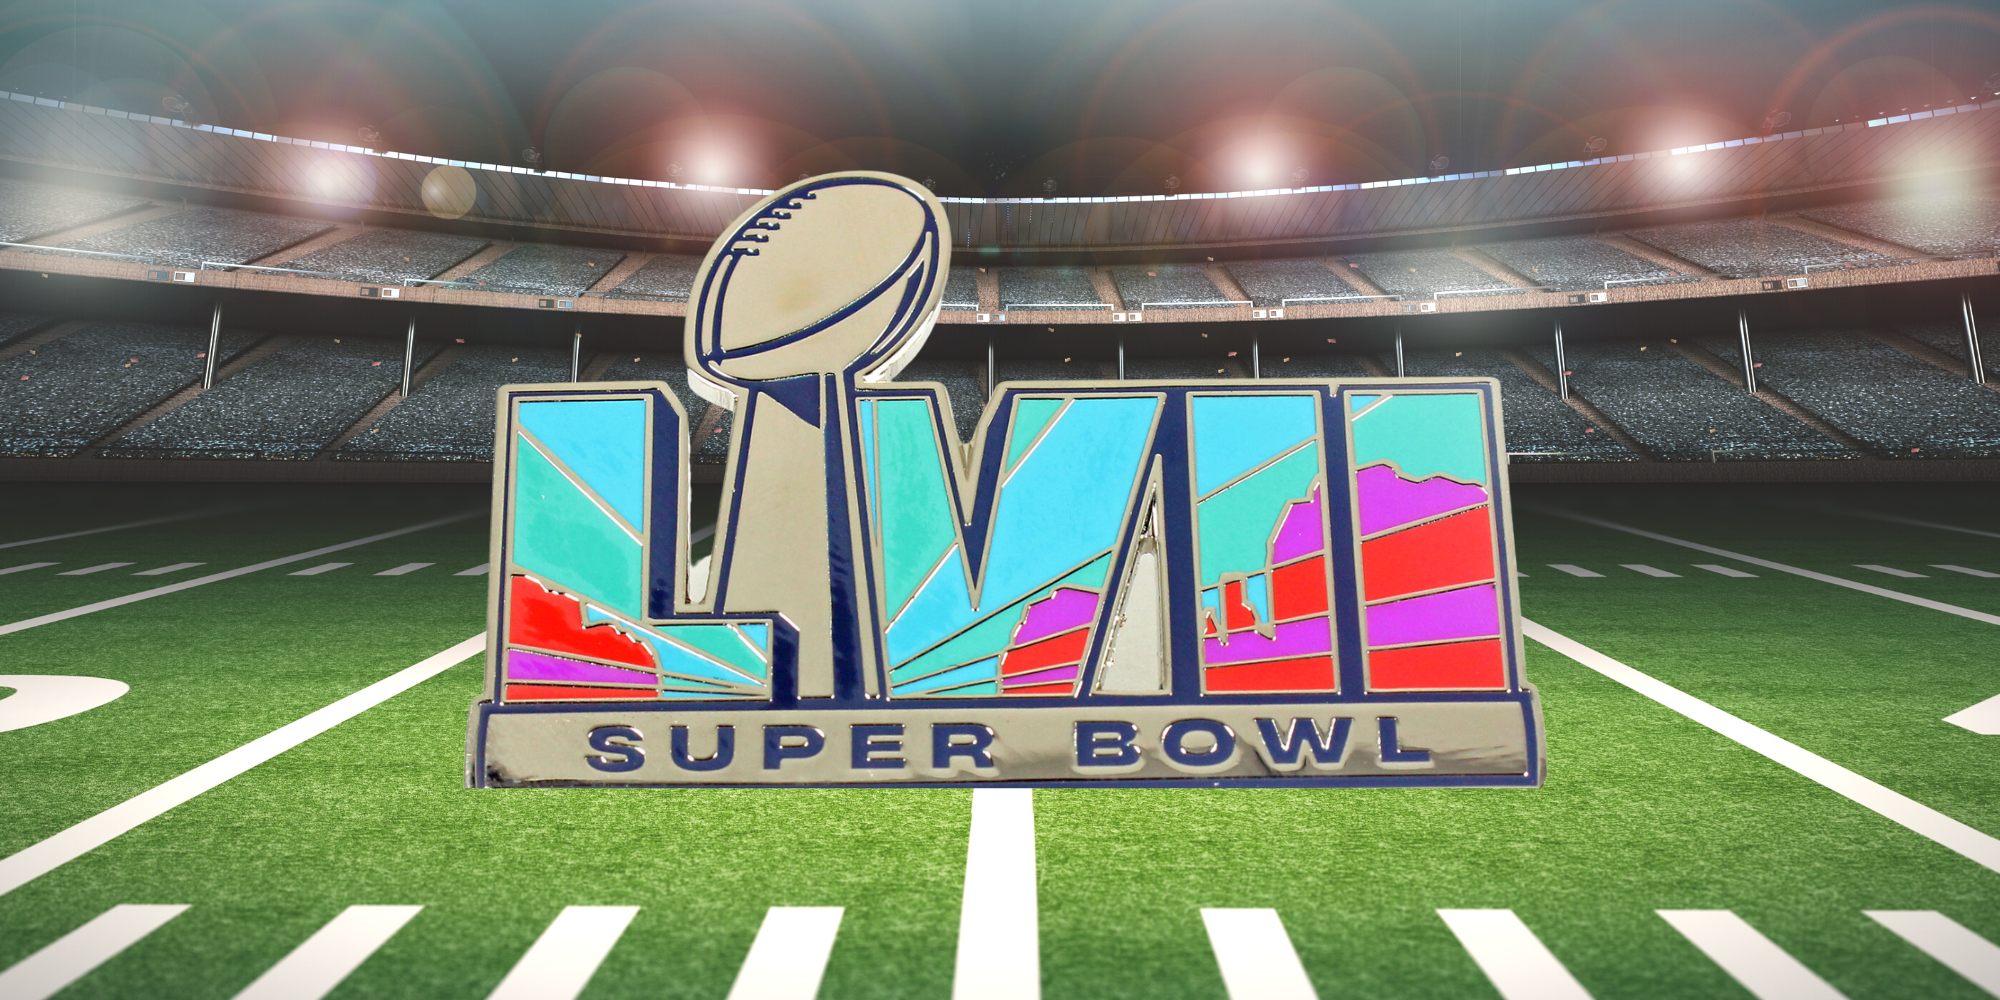 Super Bowl LVII: What to Know About the 2023 Football Game